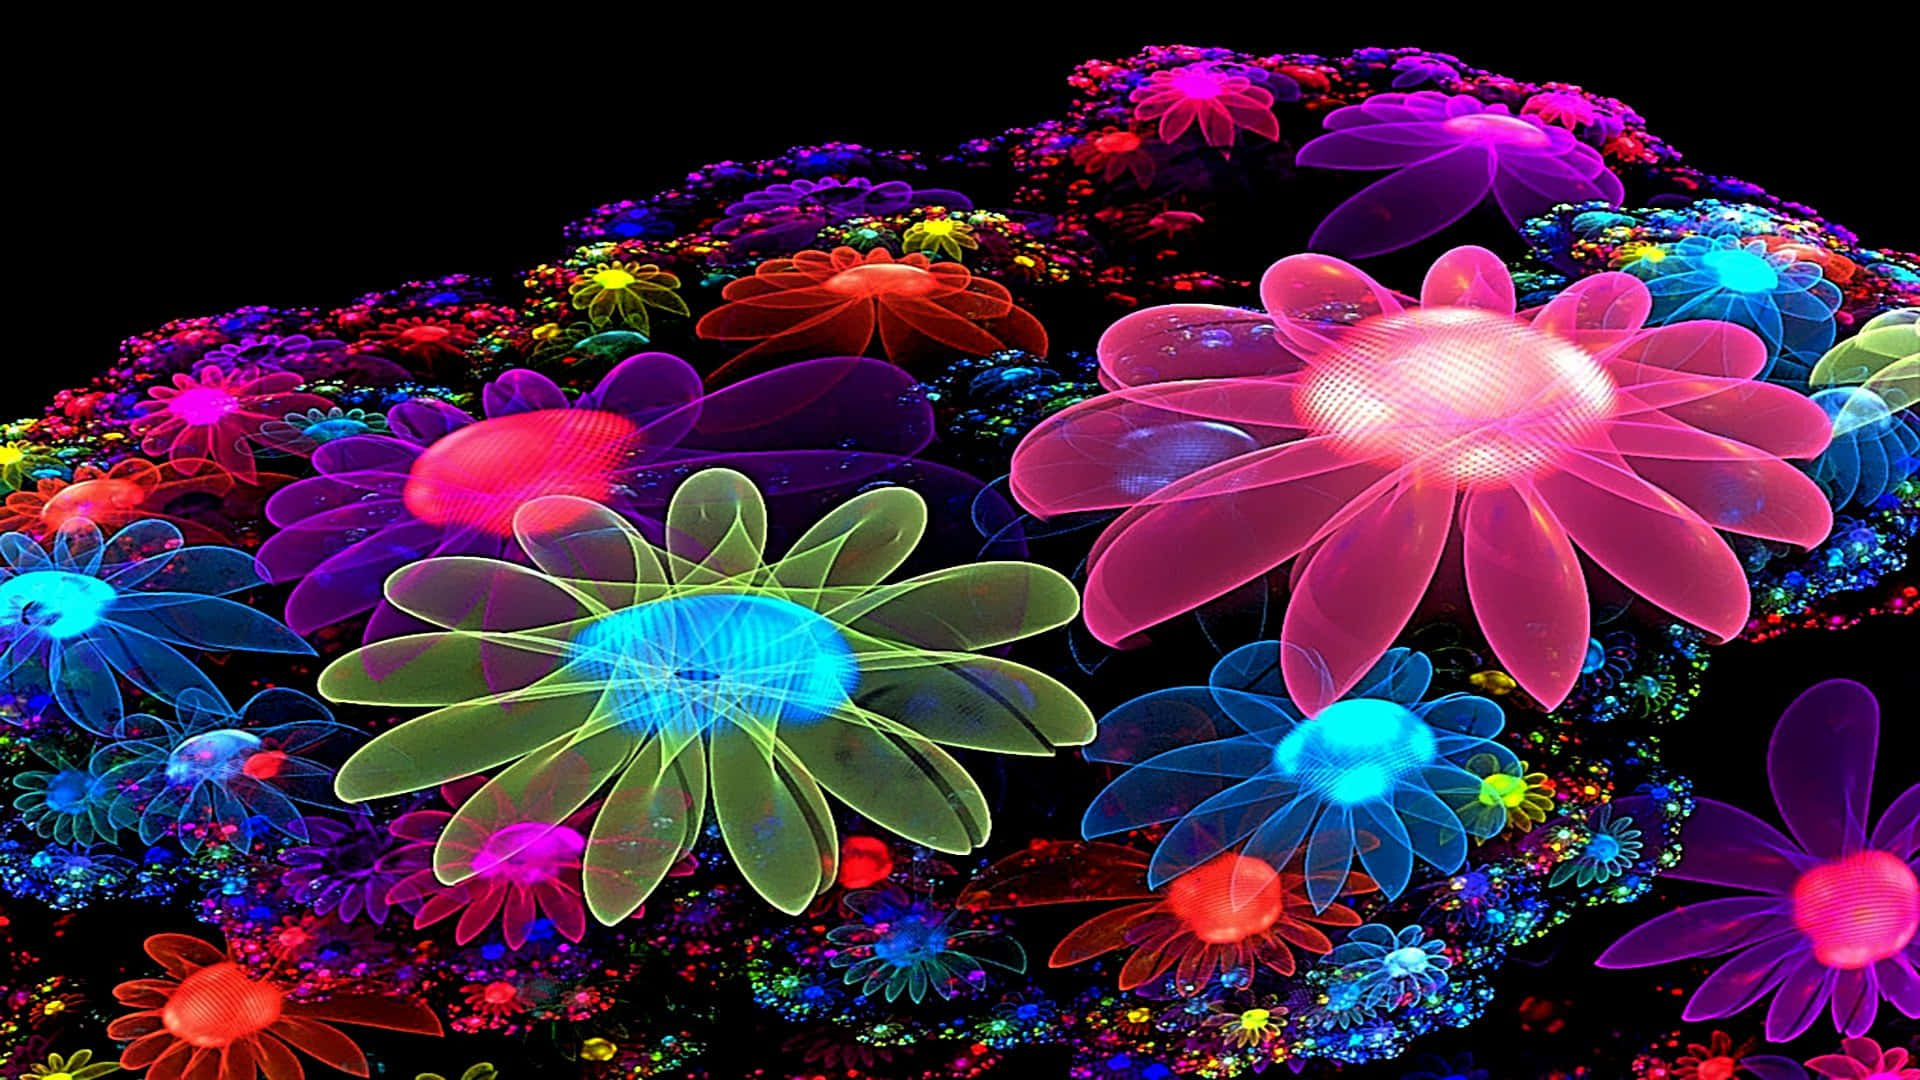 https://wallpapers.com/images/hd/colourful-neon-flowers-qe1t4ft0u0aizlw6.jpg